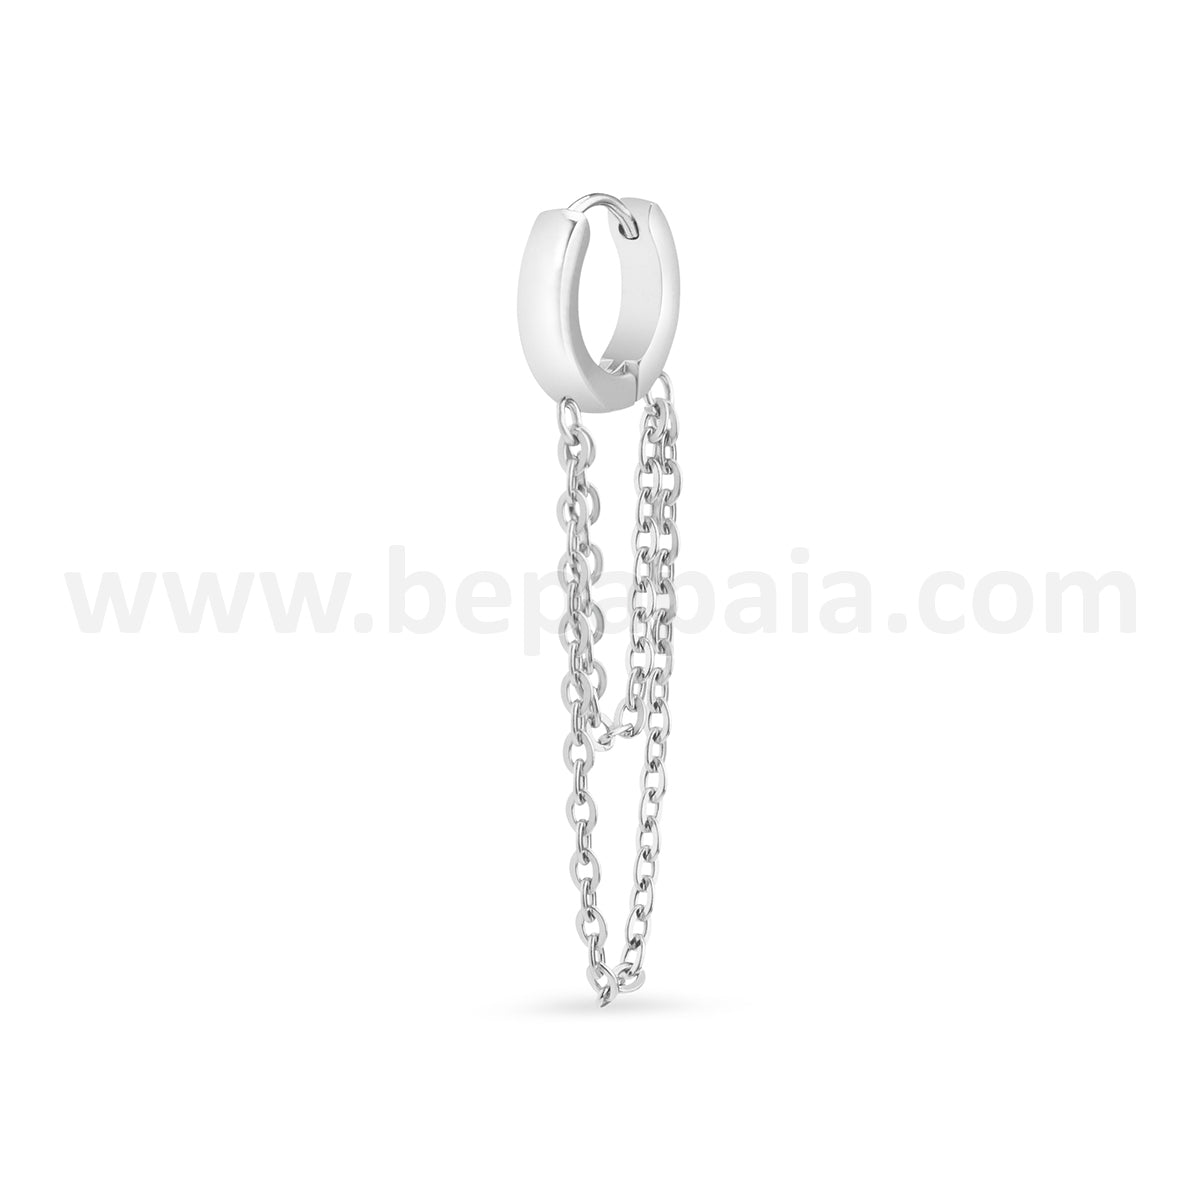 Stainless steel huggie hoop earring with double chain  